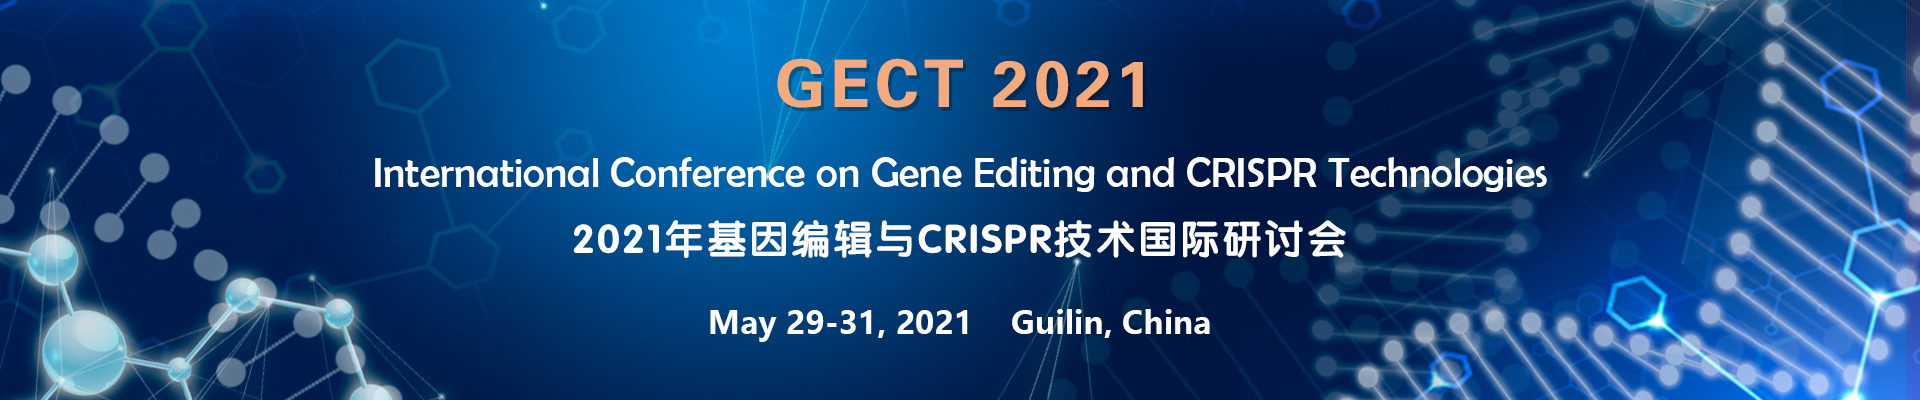 Int'l Conference on Gene Editing and CRISPR Technologies (GECT 2021), Guilin, Guangxi, China